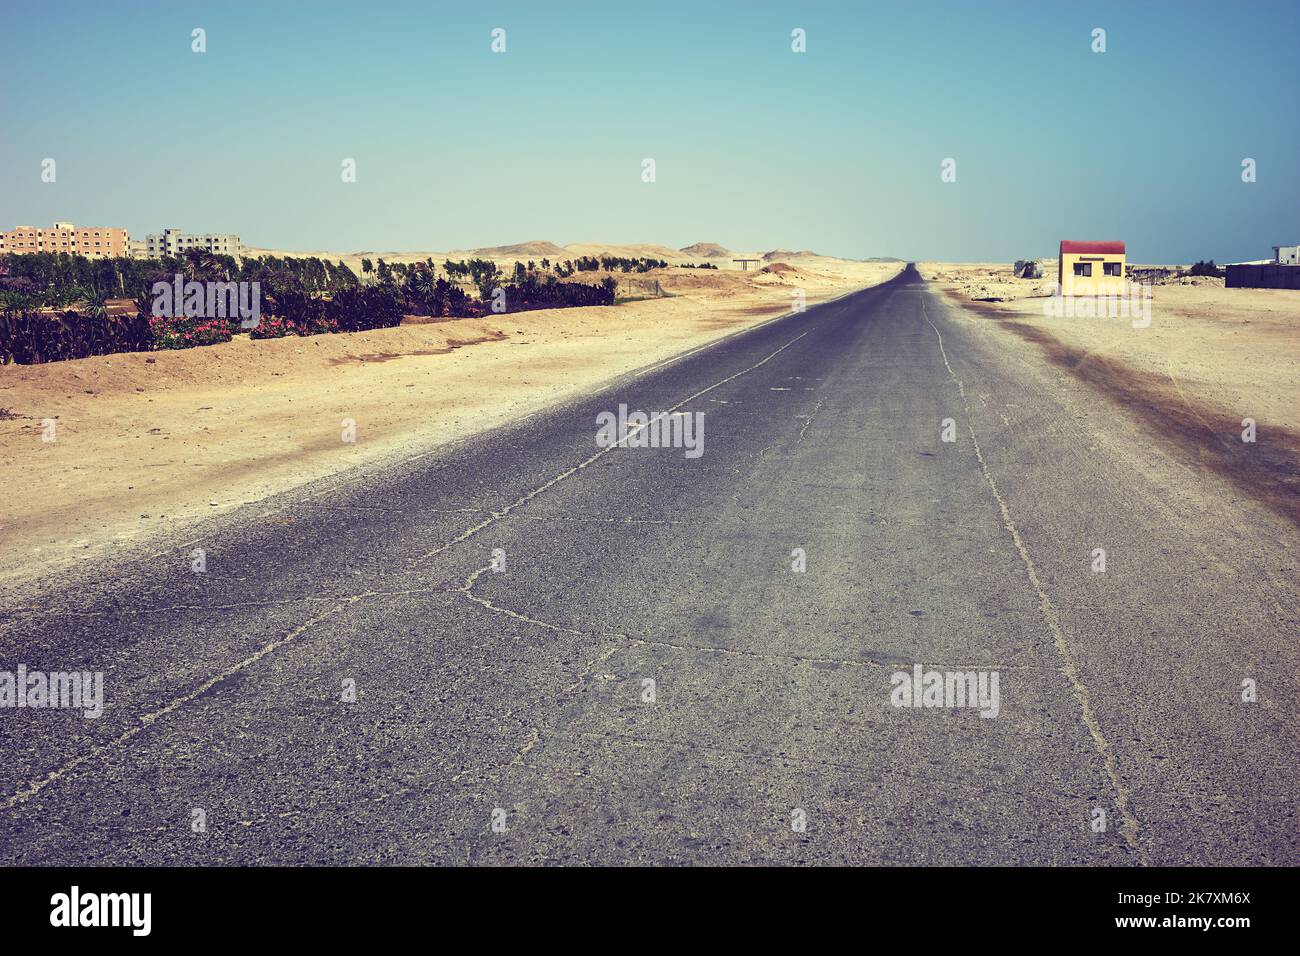 Empty asphalt desert road, focus on the foreground, color toning applied, Egypt. Stock Photo